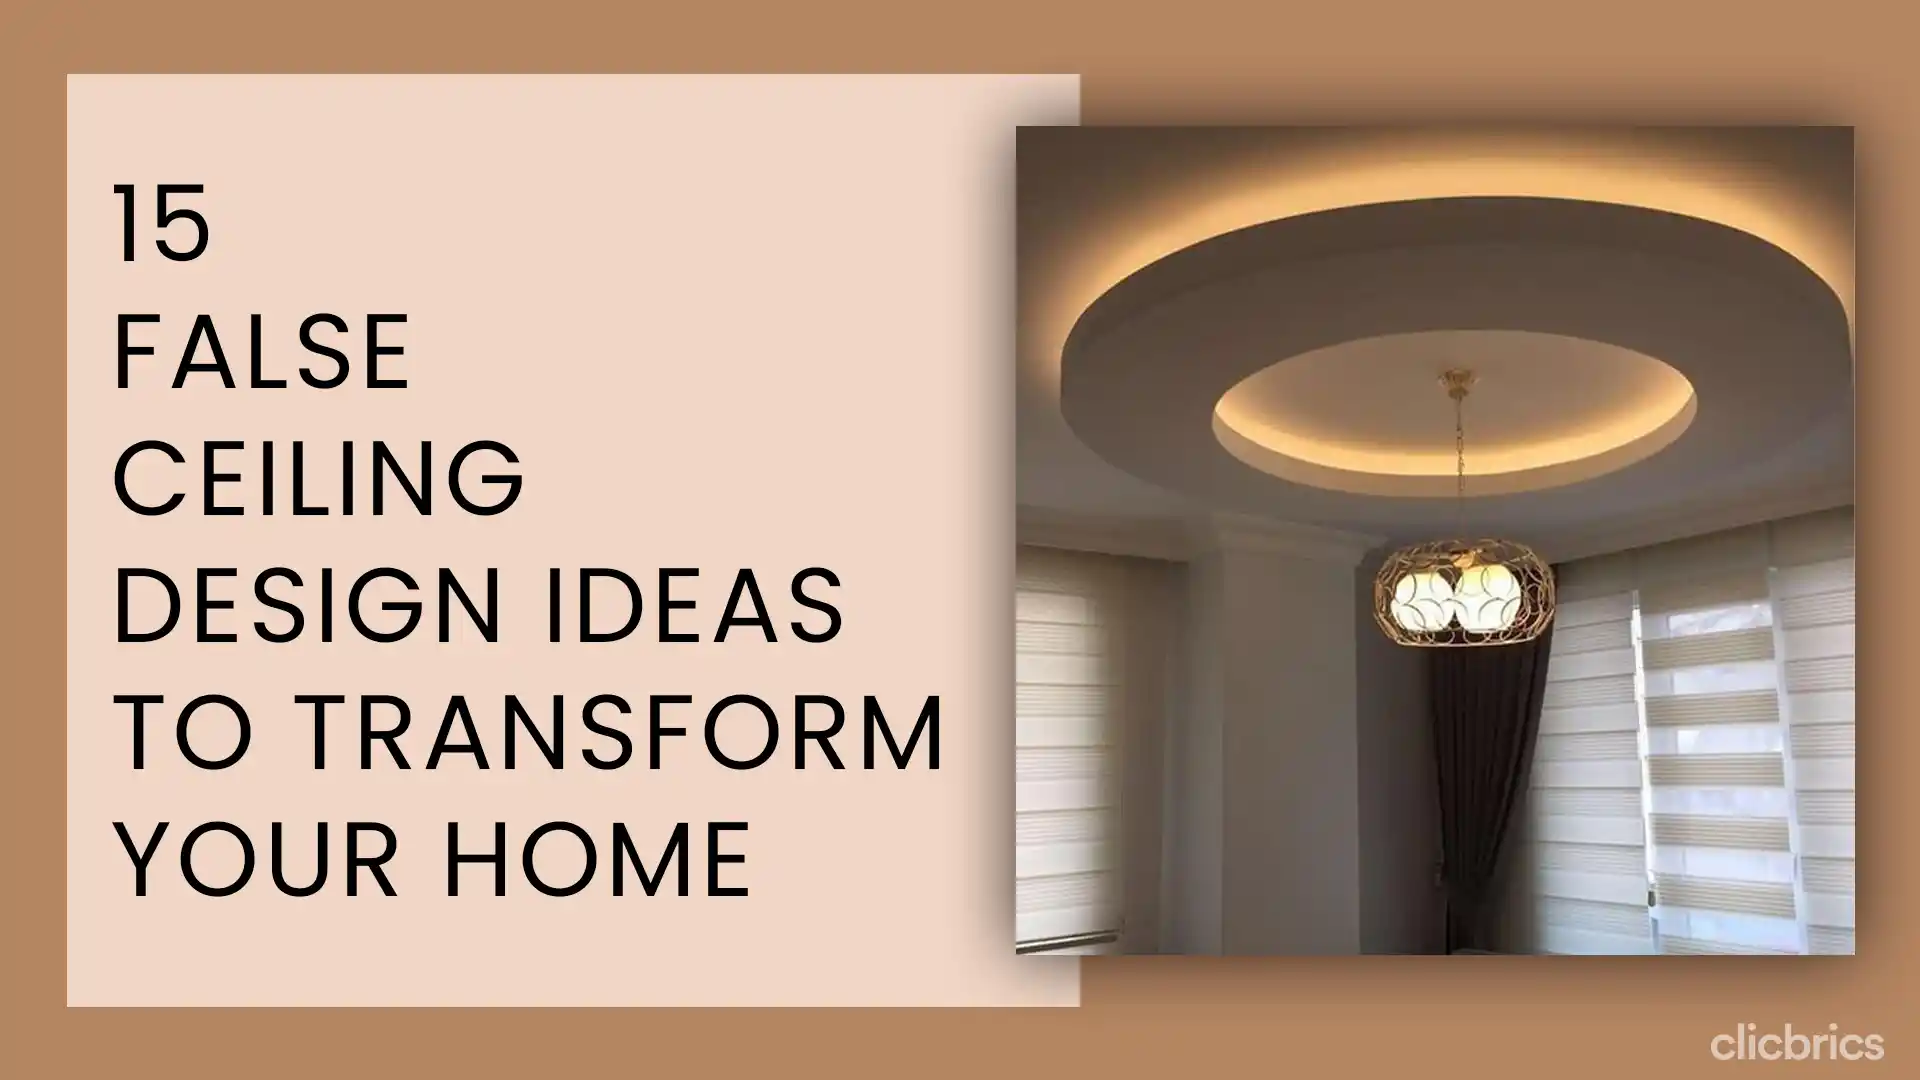 8 dining room ceiling design that would transform your dining space |  Housing News